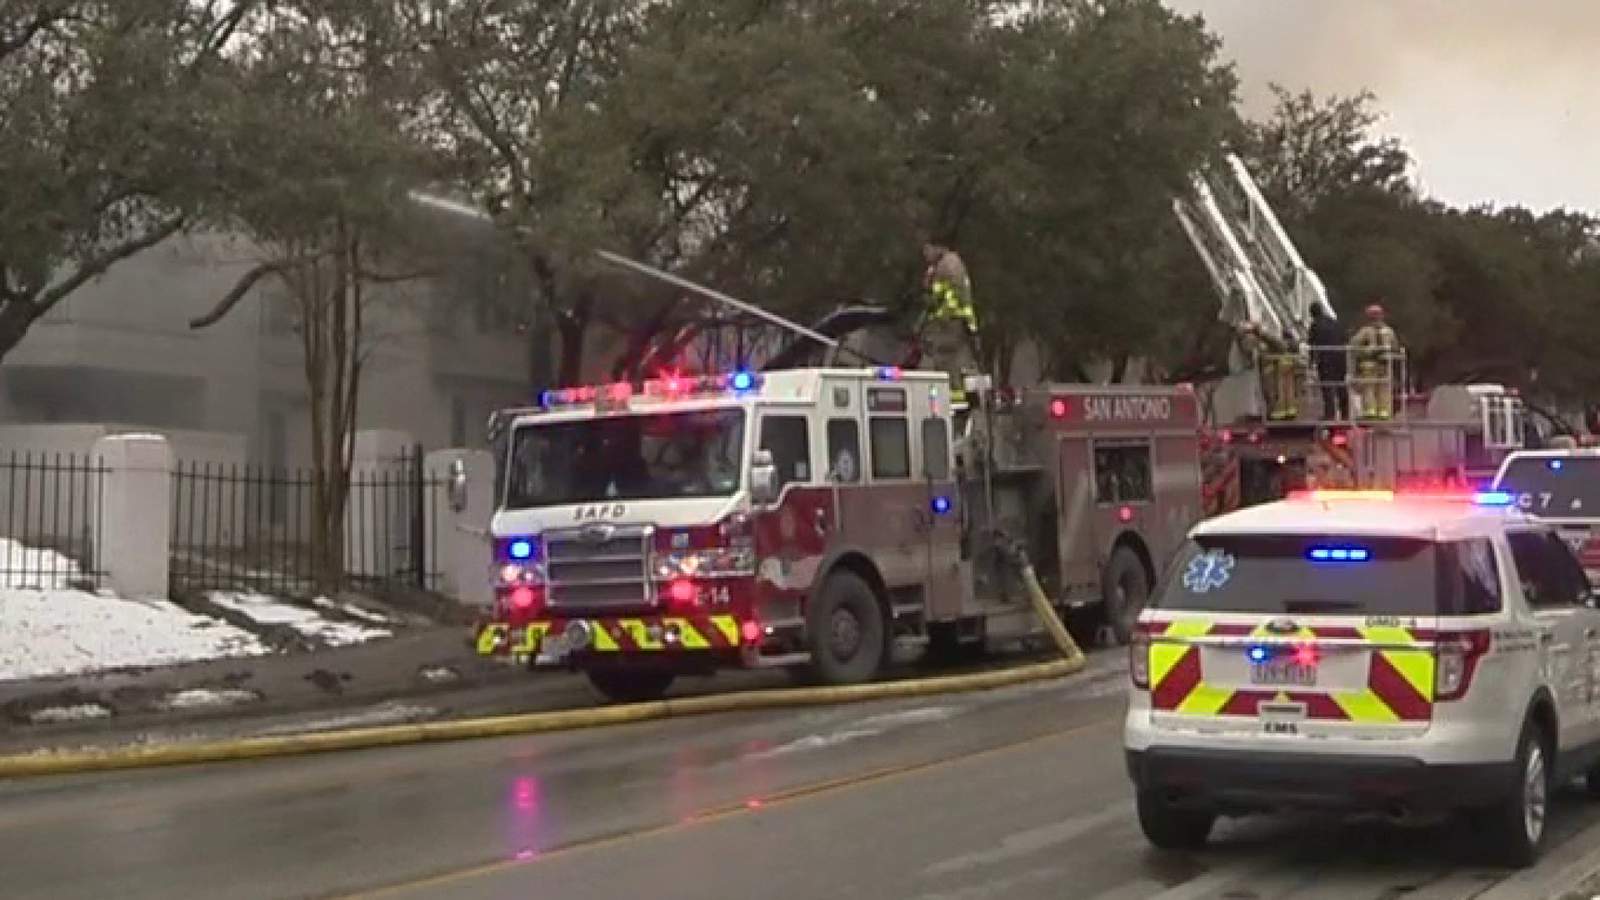 ‘We have a duty to come to protect people’: Dangerous winter conditions led to busy week for San Antonio first responders